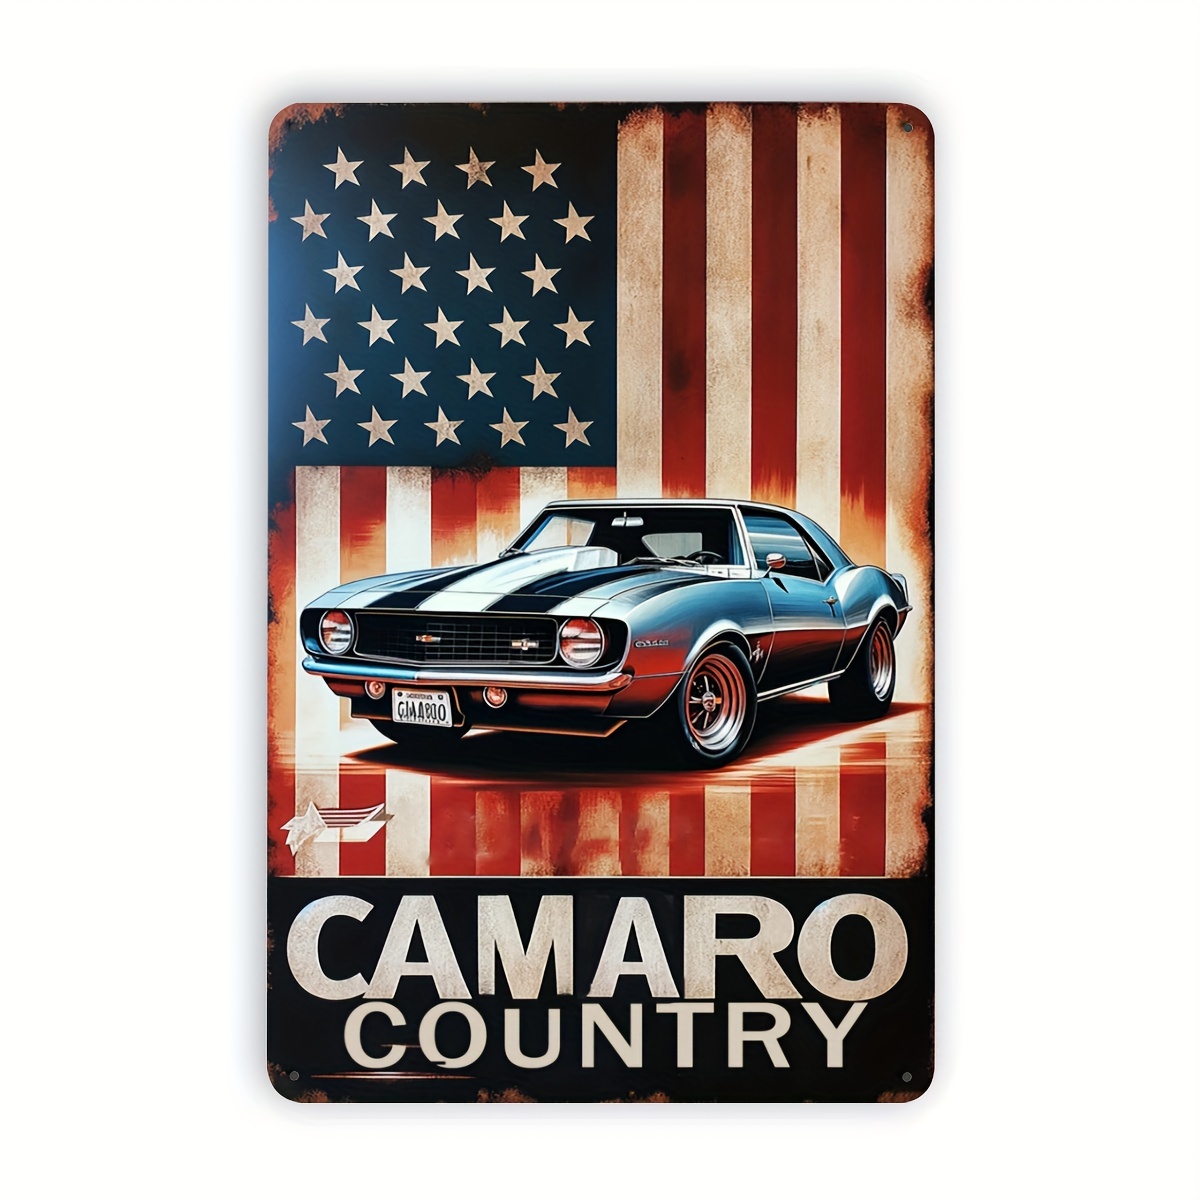 

Vintage Aluminium Sign: Patriotic Car Poster, 8x12 Inches, Perfect For Home, Office, Garage, Bedroom, Man Cave, Or Club Decor - Metal Retro Wall Art